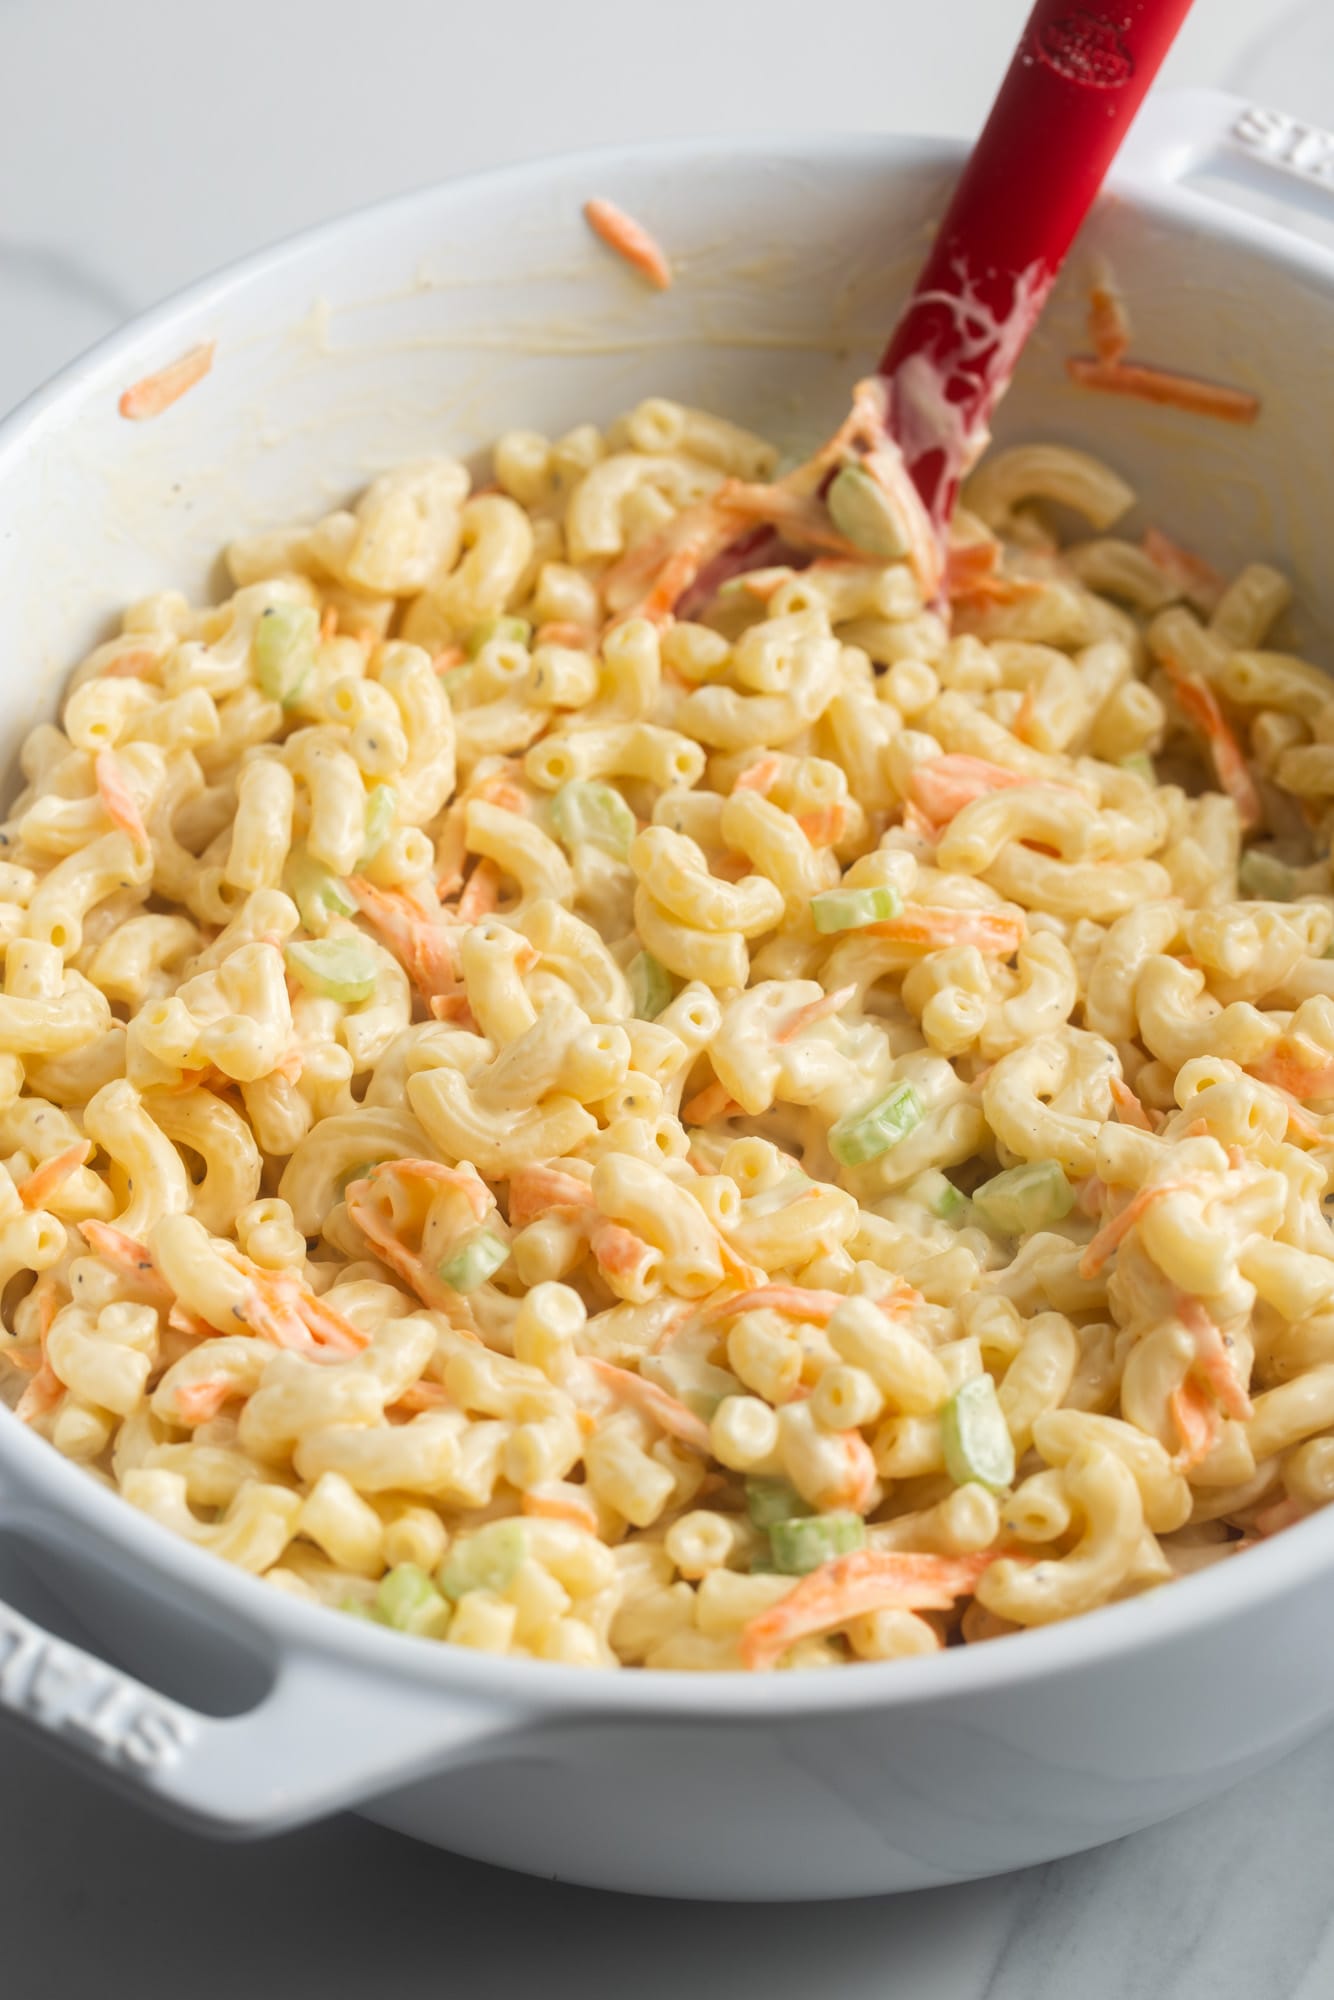 stirring dressing into elbow noodles and vegetables to make macaroni salad.